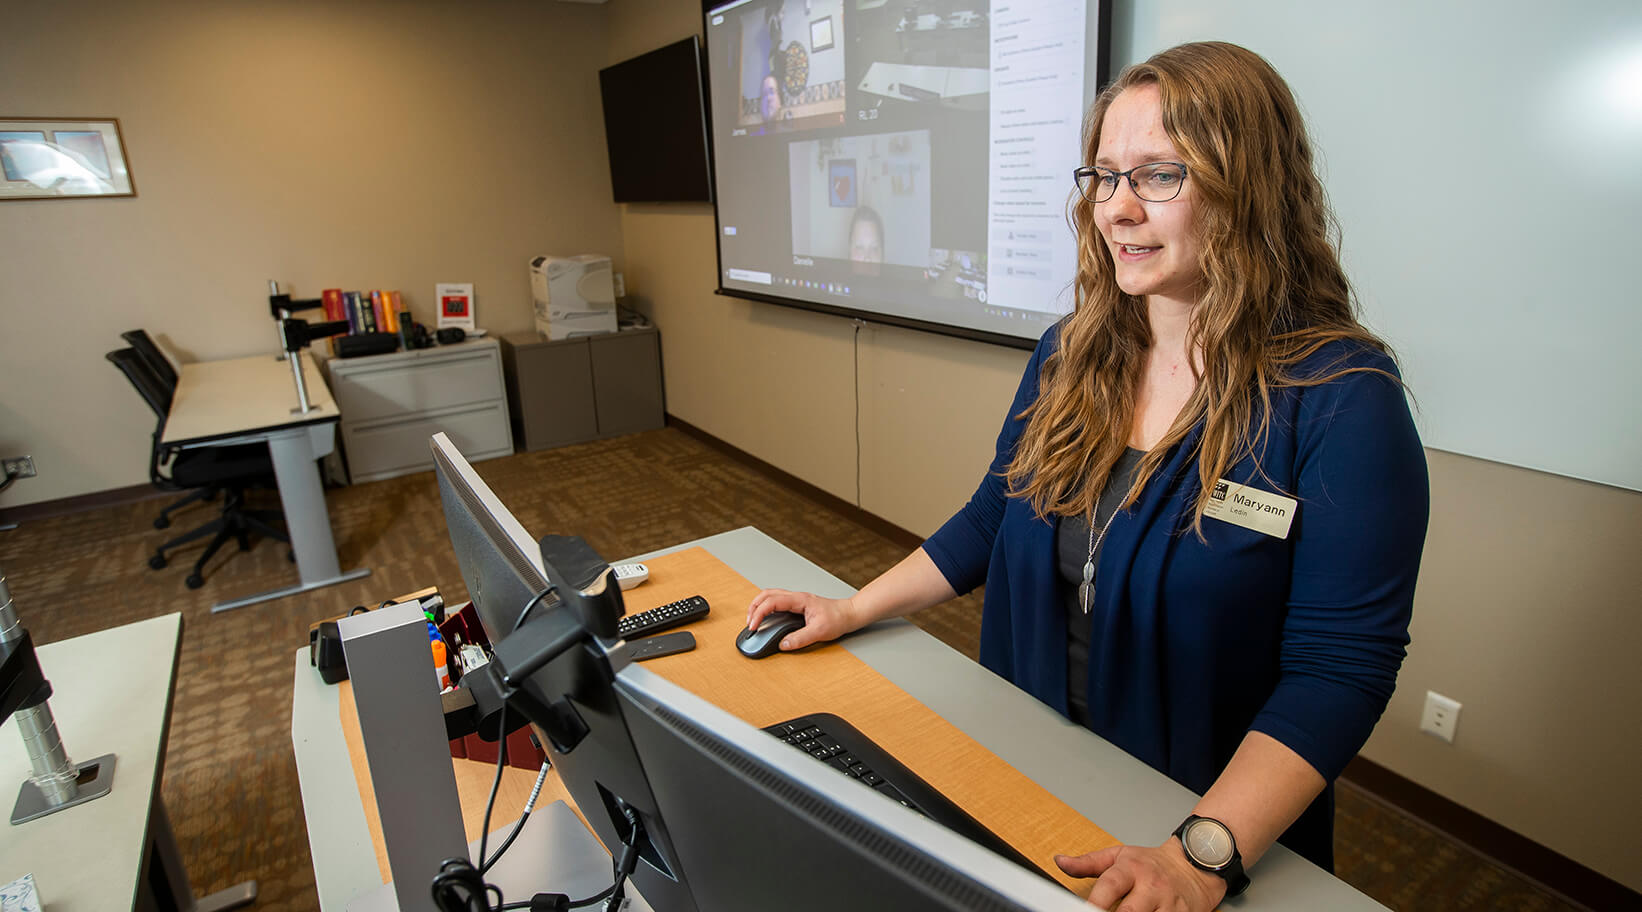 An instructor conducting a classroom where students are virtual and in the classroom